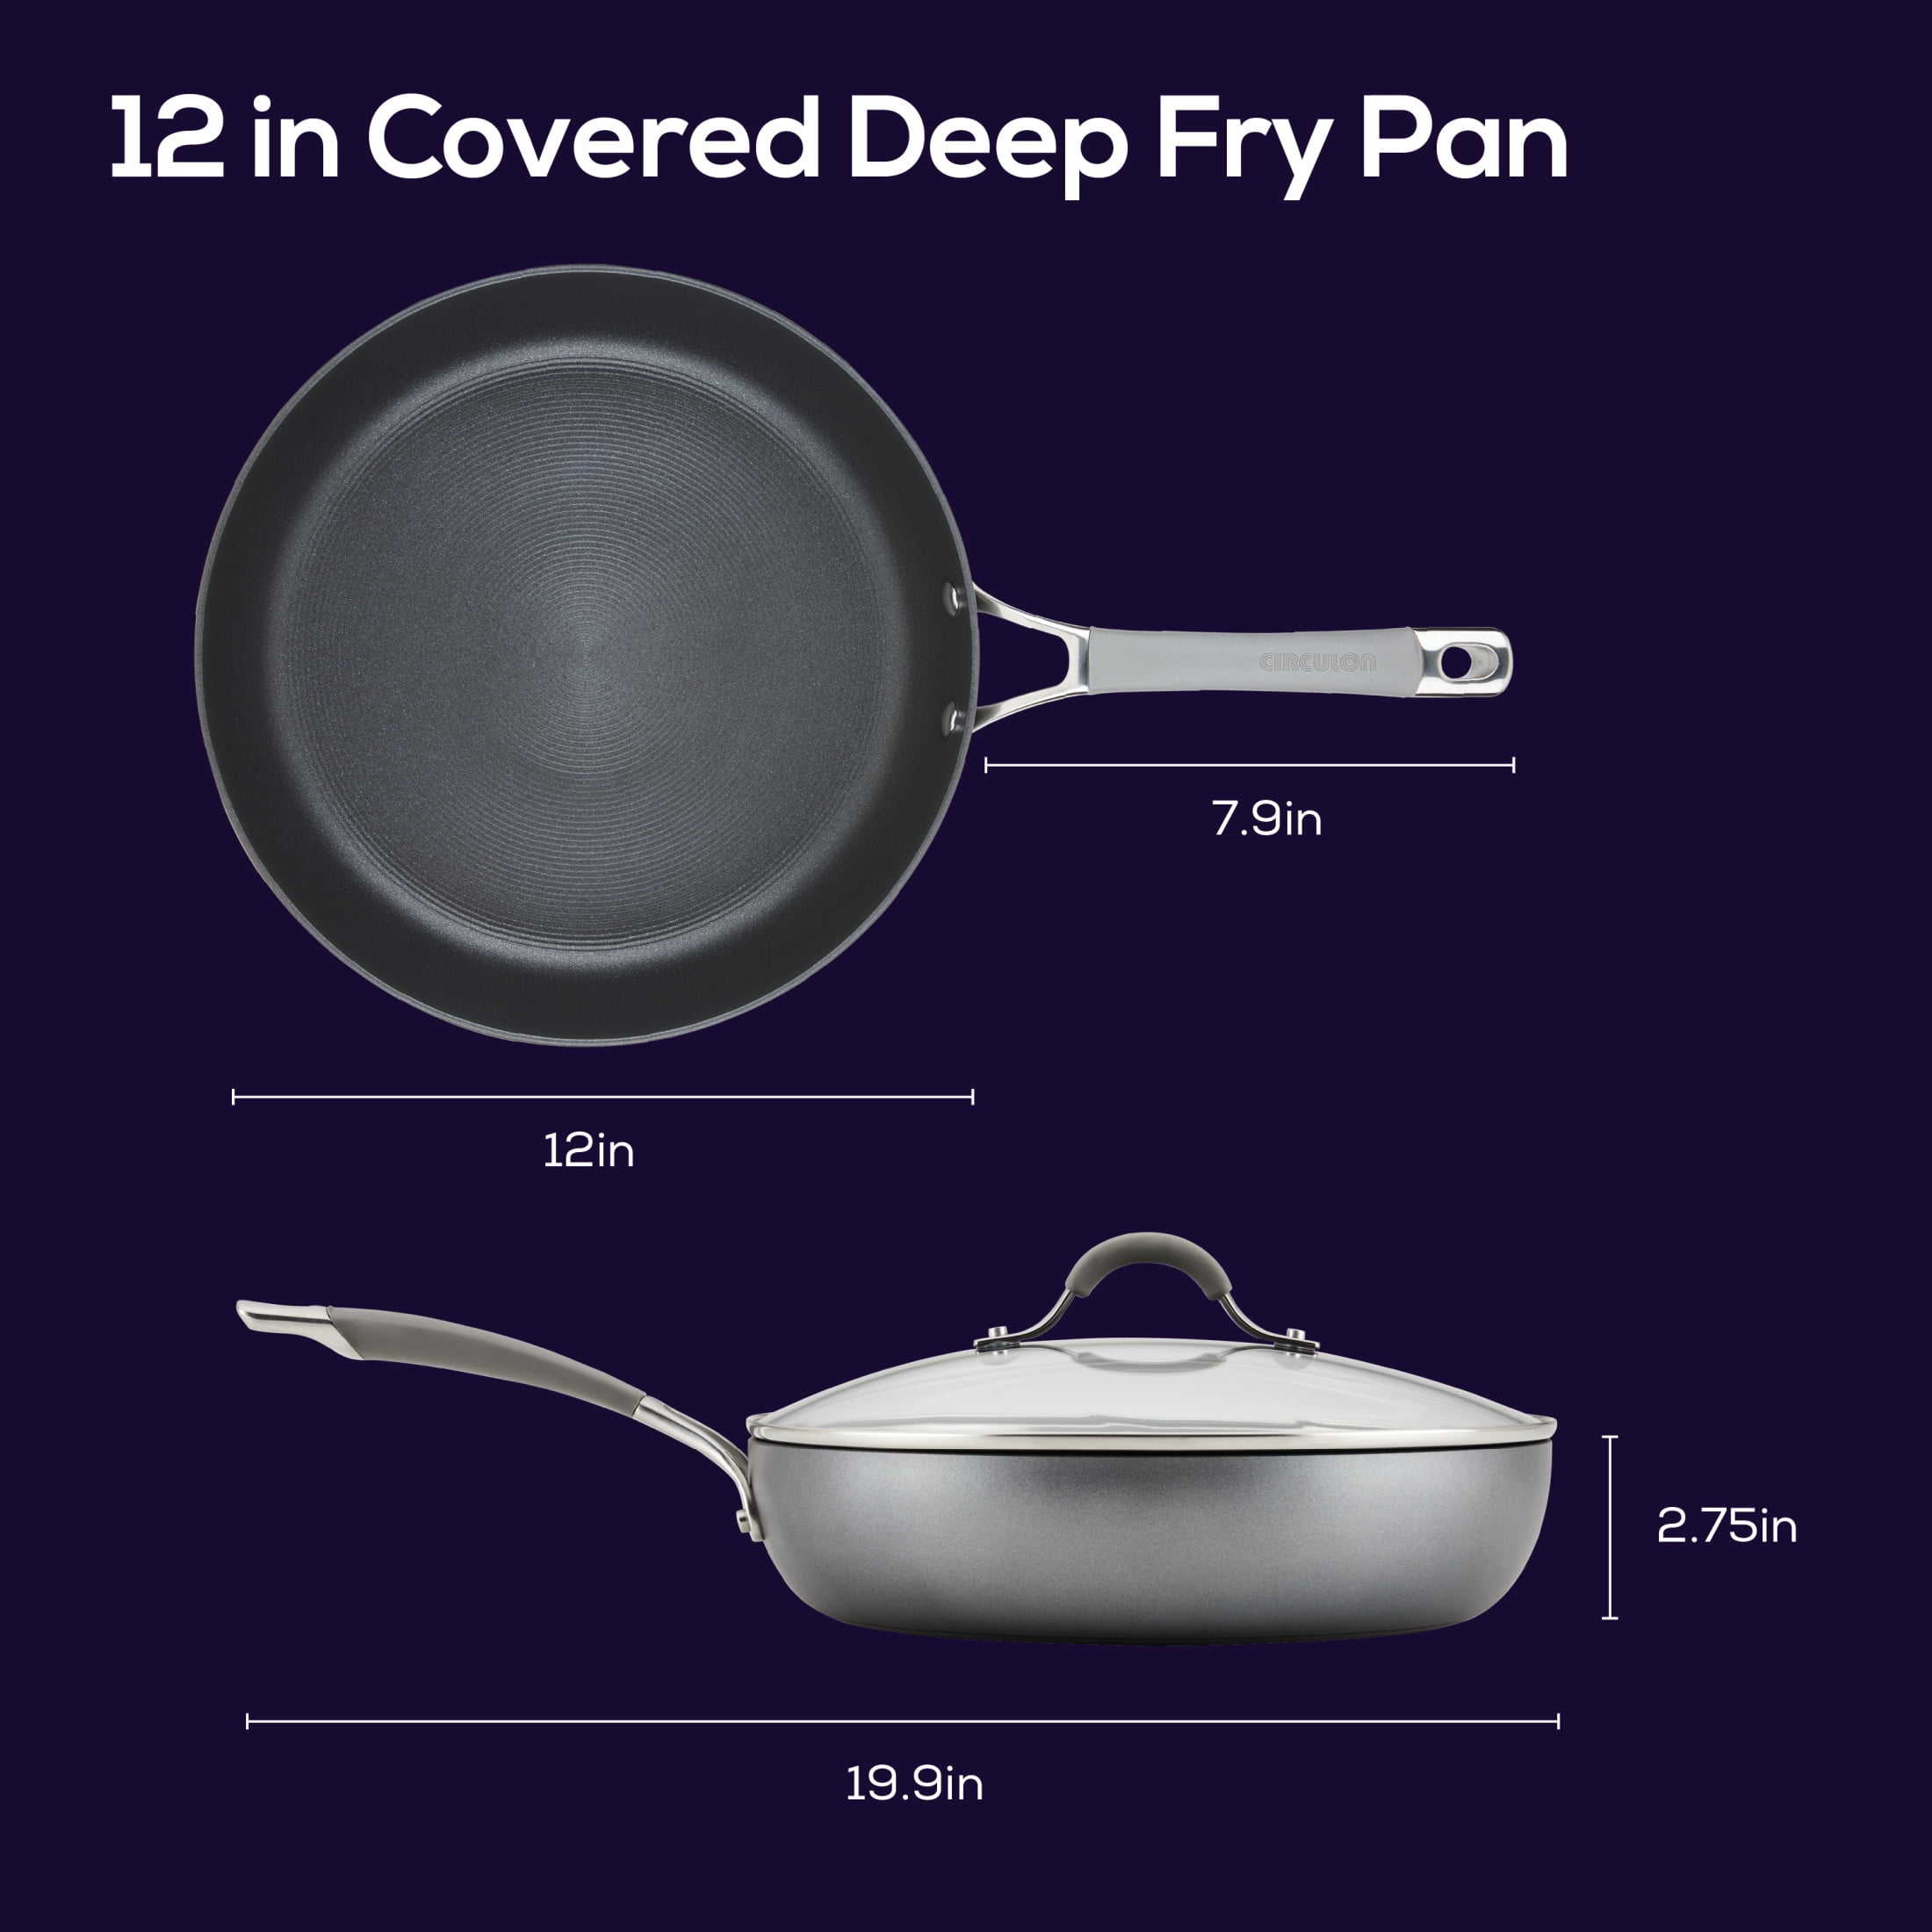 Circulon Elementum Hard-Anodized Nonstick Skillet Twin Pack - Oyster Gray,  2 pc - King Soopers